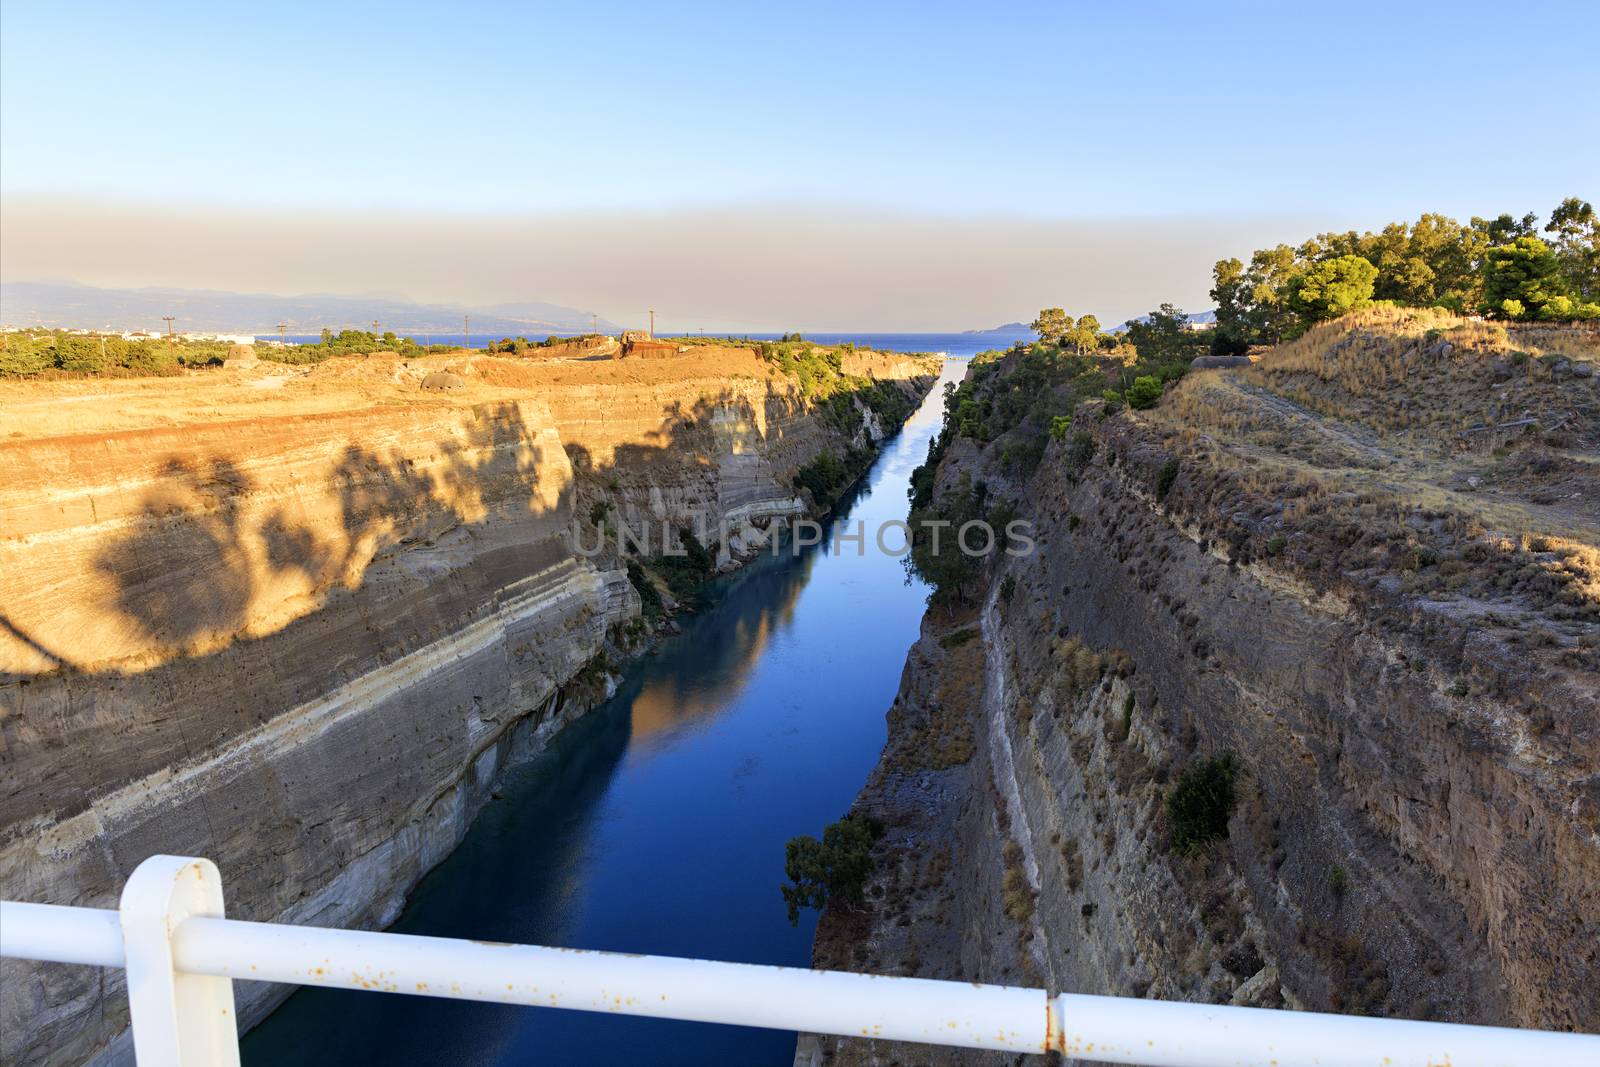 The Corinth Canal on a morning summer day illuminates the bright rising sun in Greece, a view of the Gulf of Corinth from the height of a pedestrian bridge. ??????????? ????????? ????????? ???? ? ?????????? ????? ??????????? ????.